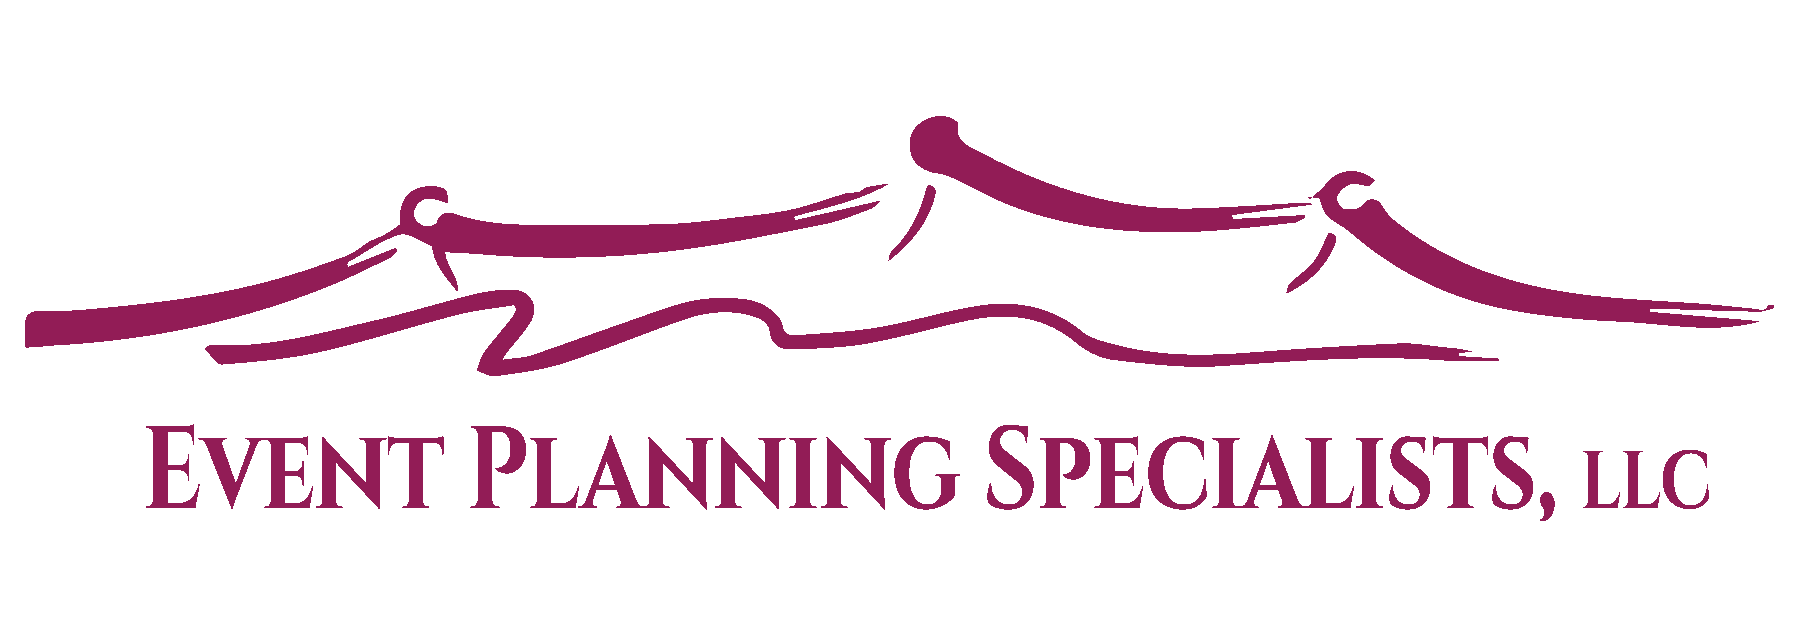 Events Planning Specialist